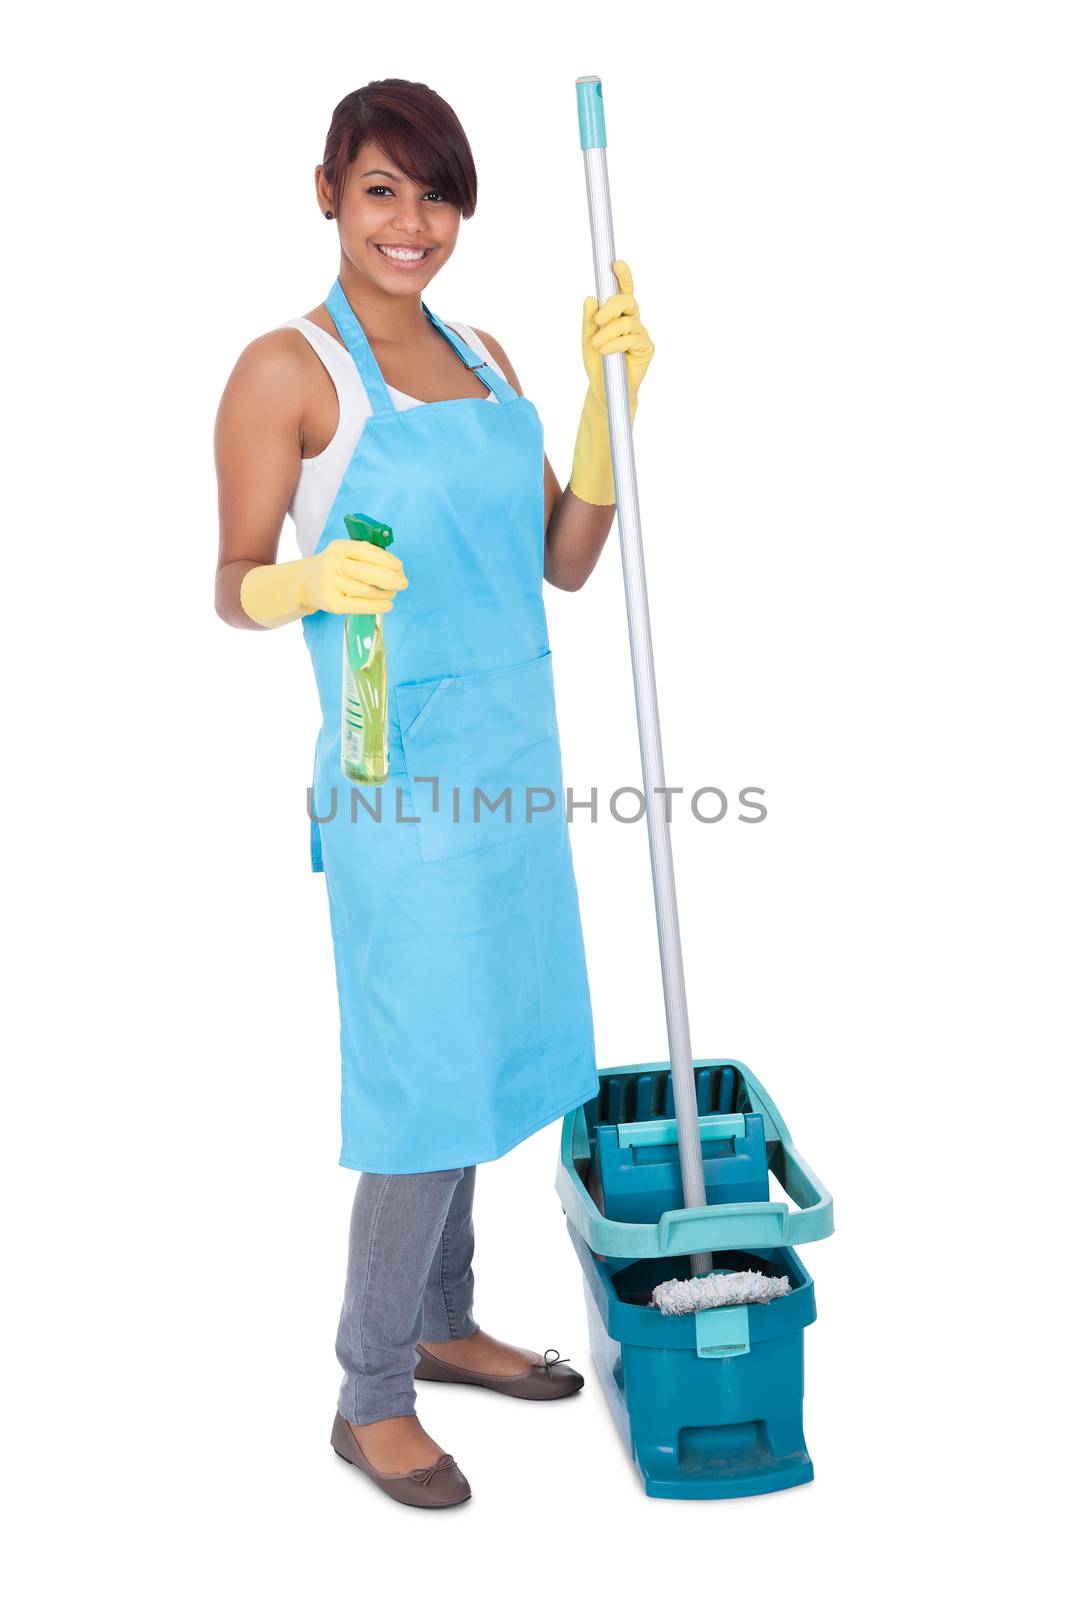 Cheerful woman having fun while cleaning. Isolated on white